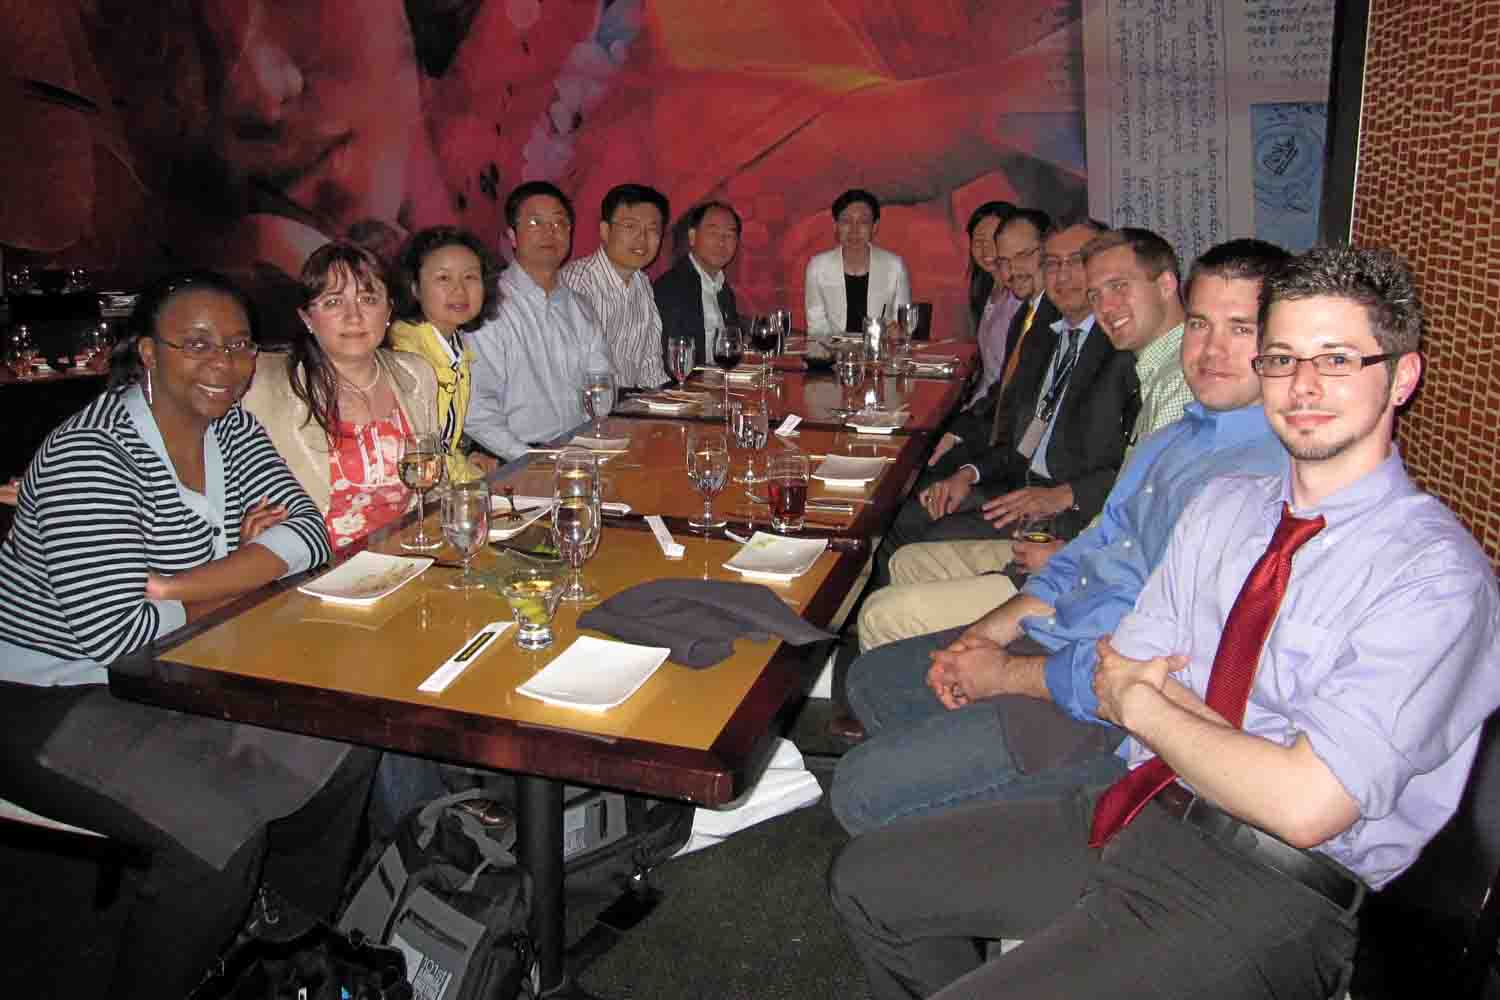 Dinner at 2010 AACR